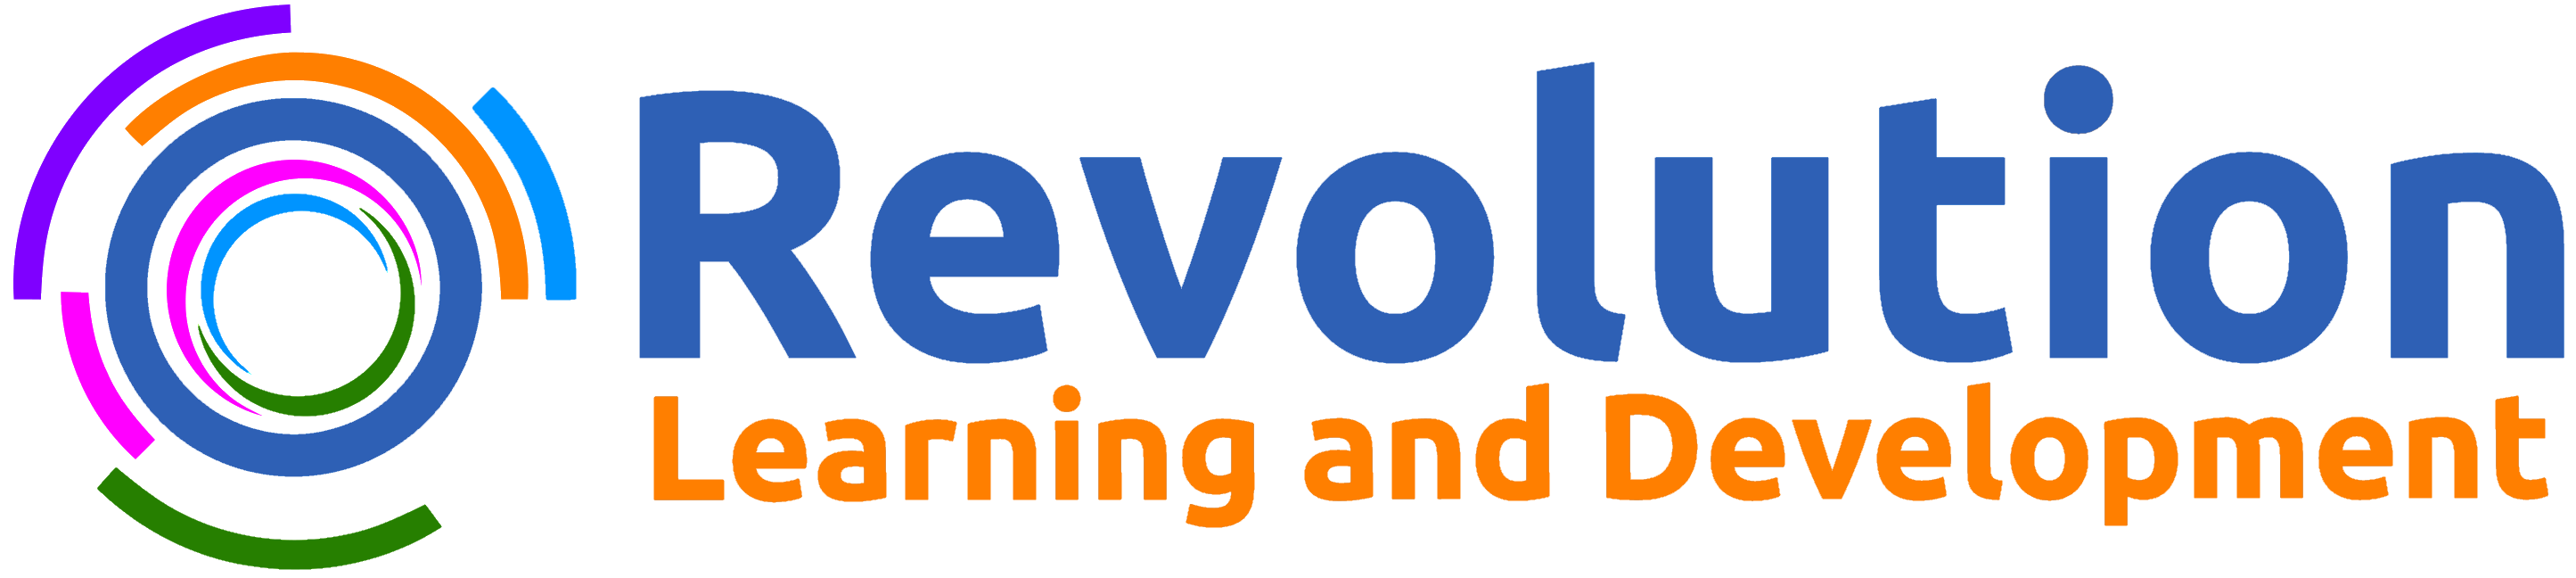 Revolution Learning and Development Europe